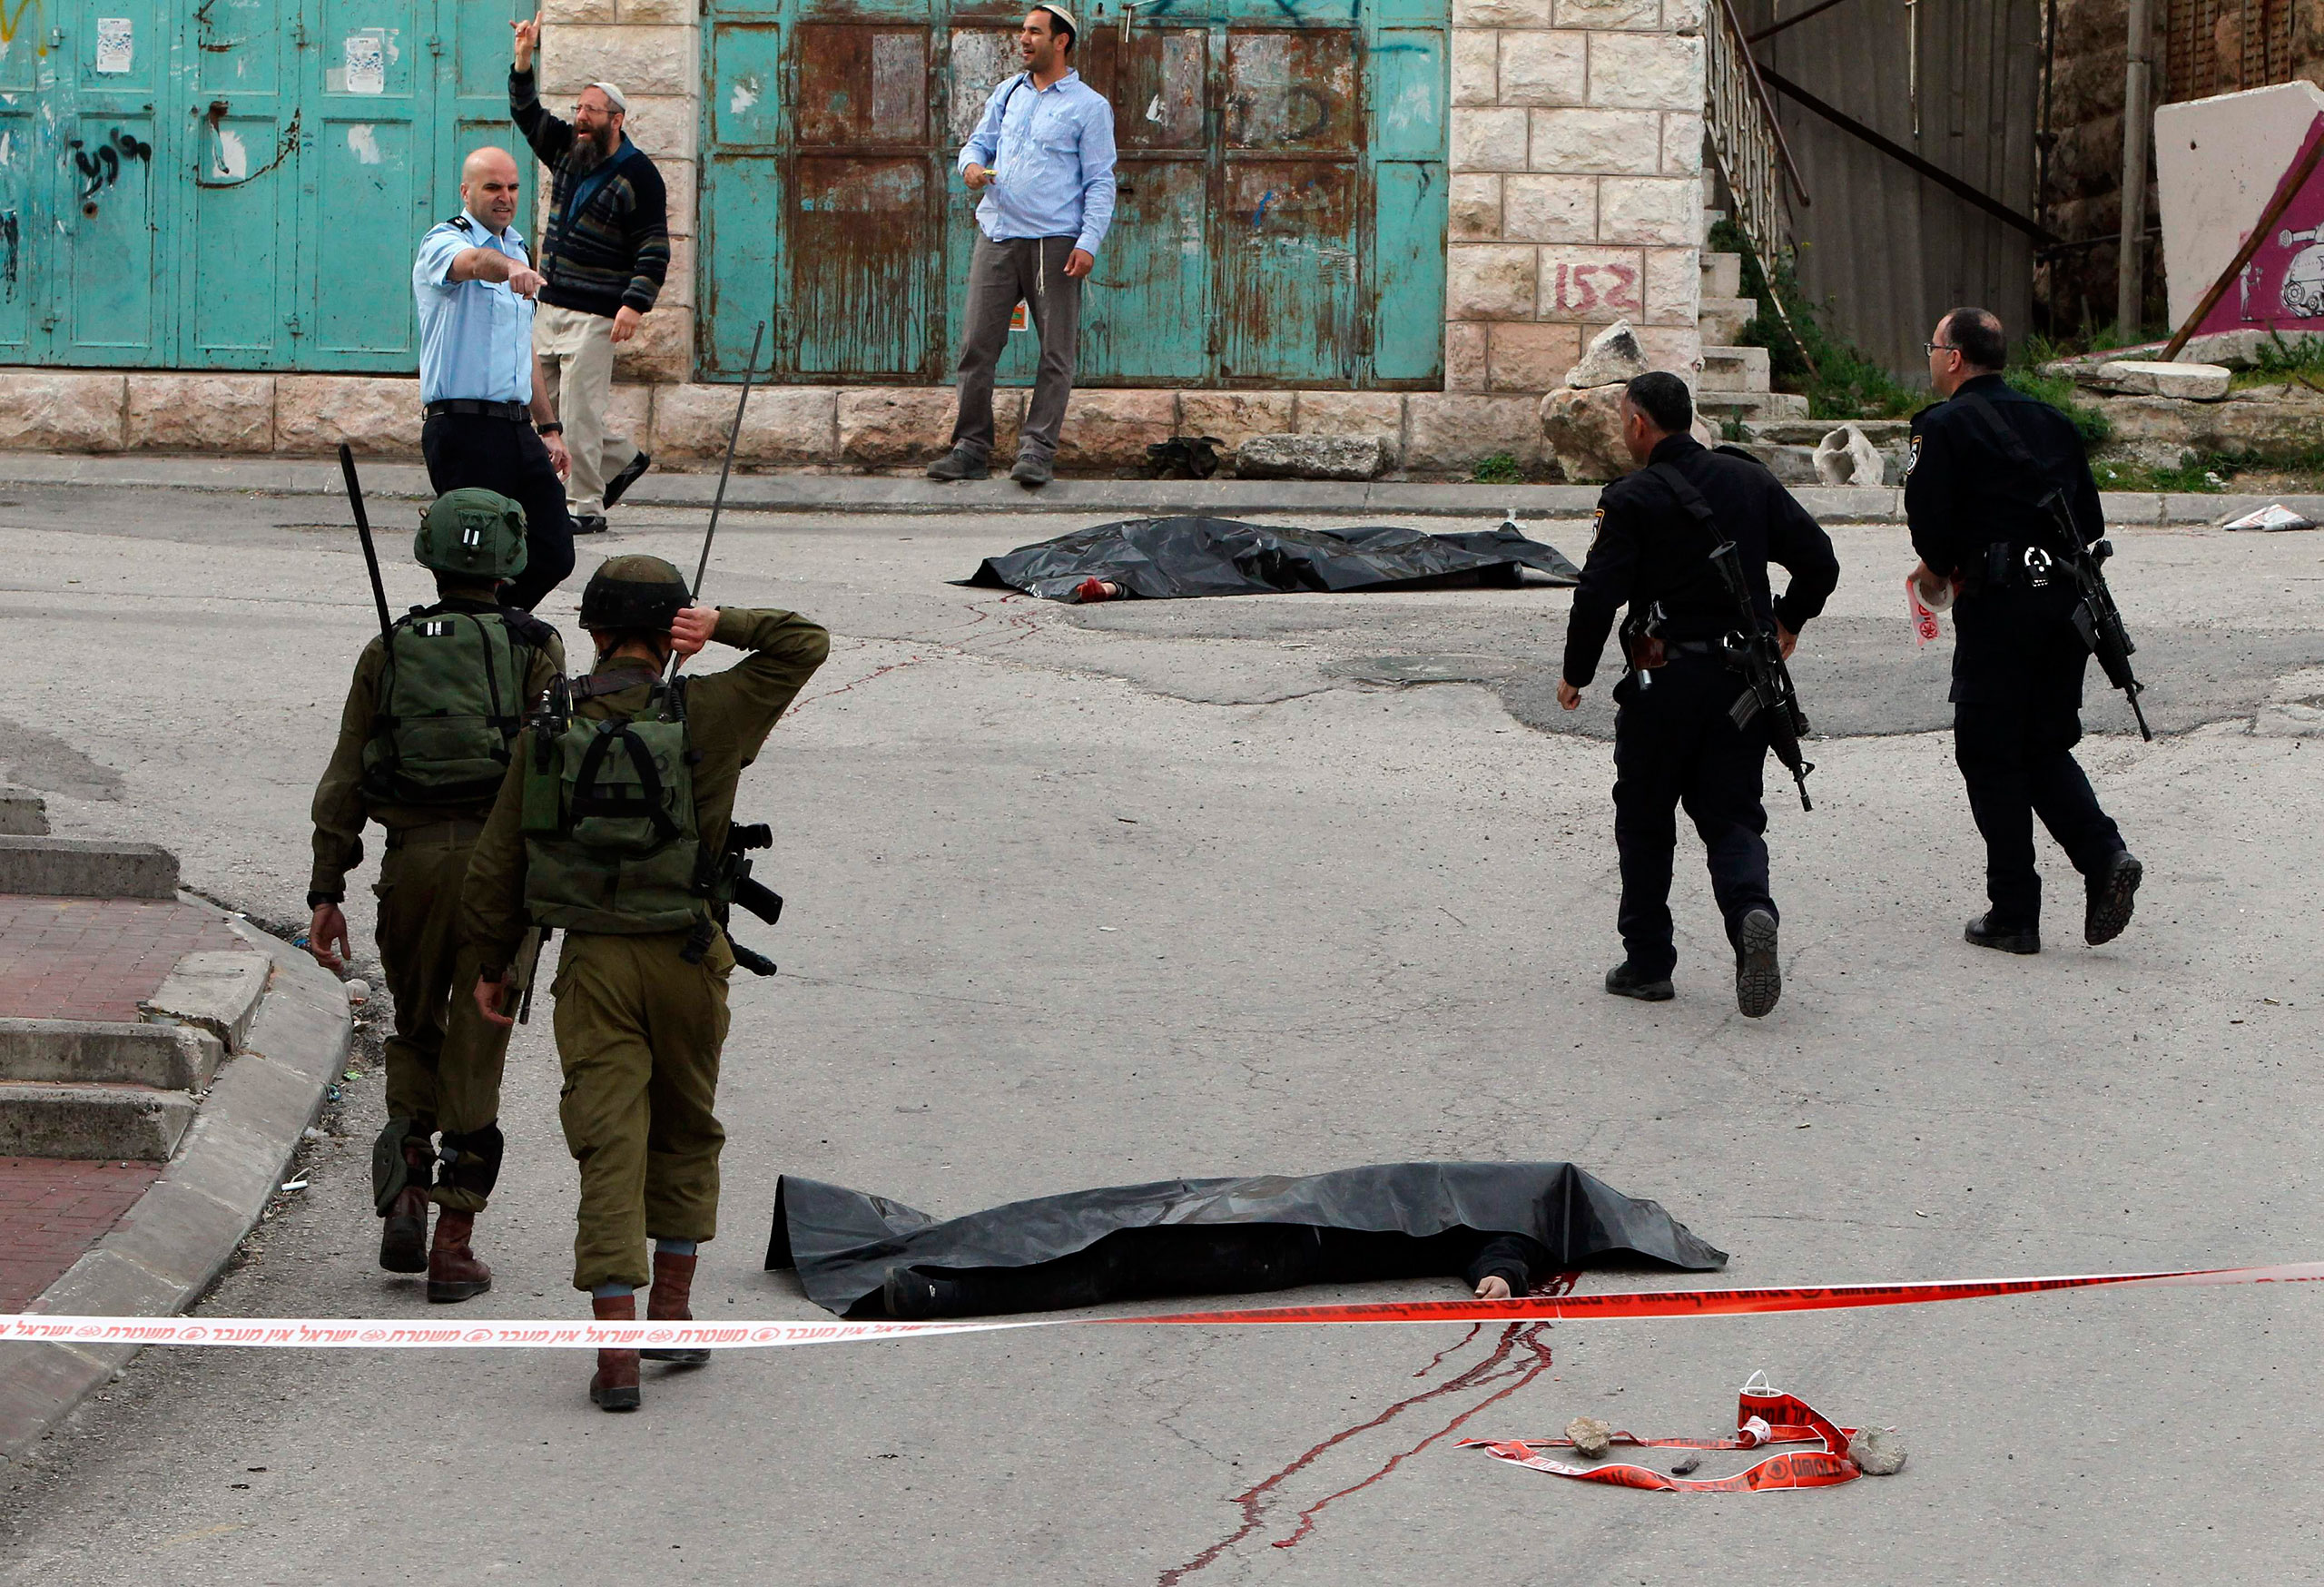 Israeli soldiers and police officers walk near the bodies of two Palestinians who were killed after wounding an Israeli soldier in a knife attack, before being shot dead by troops, in Hebron, West bank, March 24, 2016. (Hazem Bader—AFP/Getty Images)